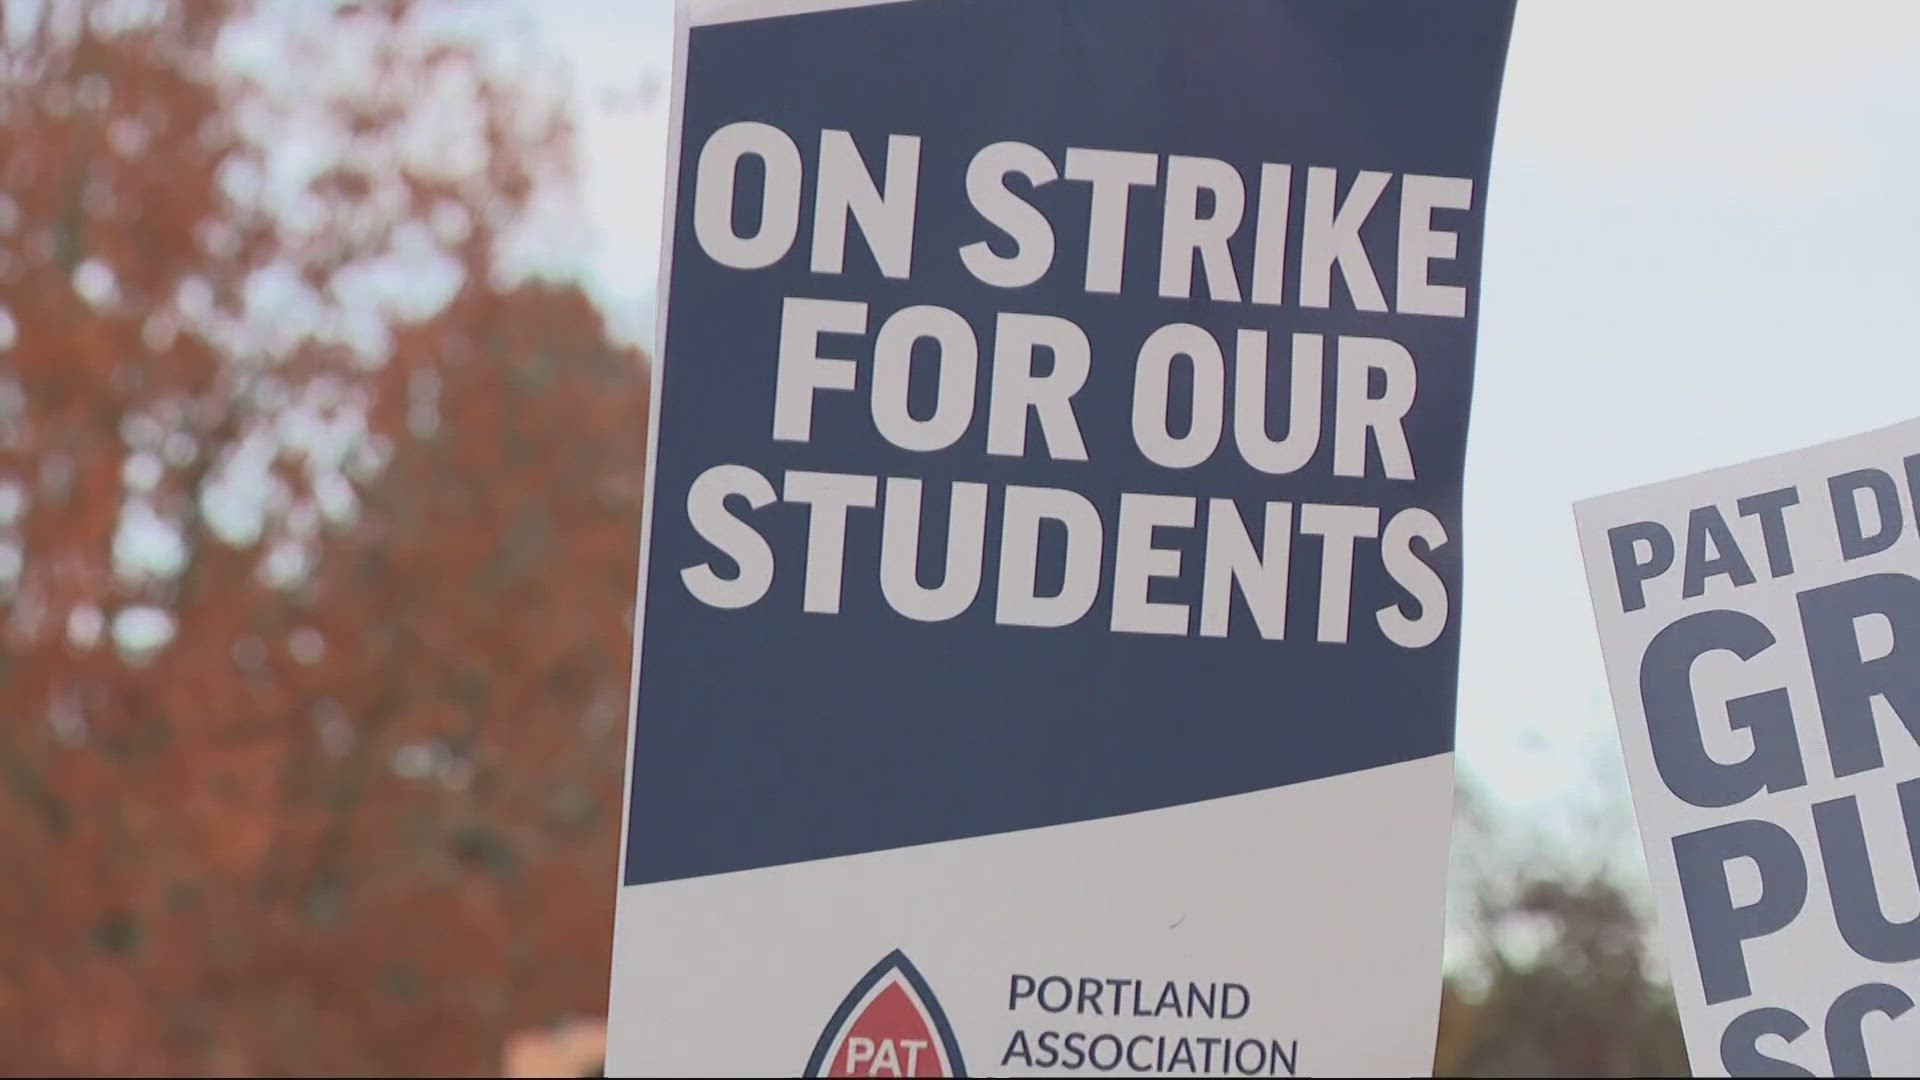 Portland Public Schools may have to extend the school year well into June to make up for lost time in the classroom due to the on-going teachers strike.